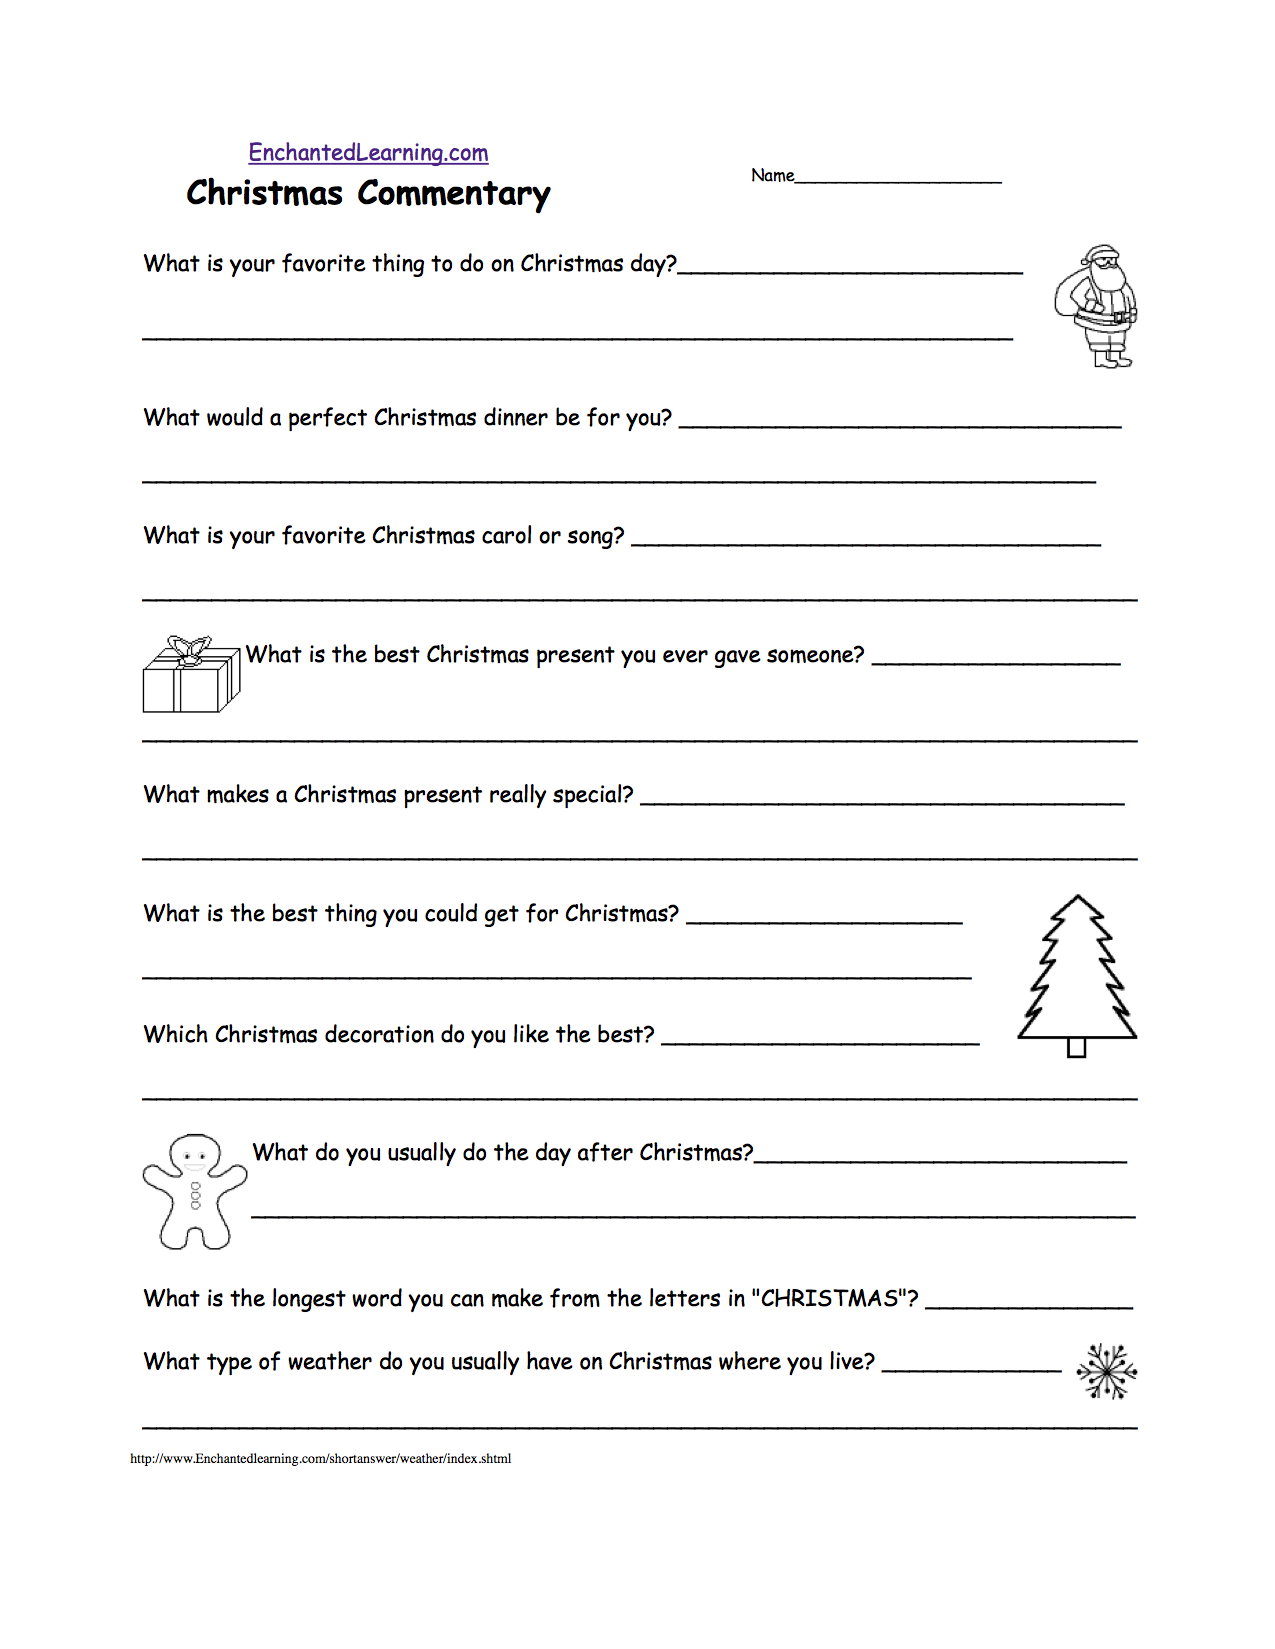 Short Answer Quizzes - Printable - Enchantedlearning - Free Printable Black History Trivia Questions And Answers